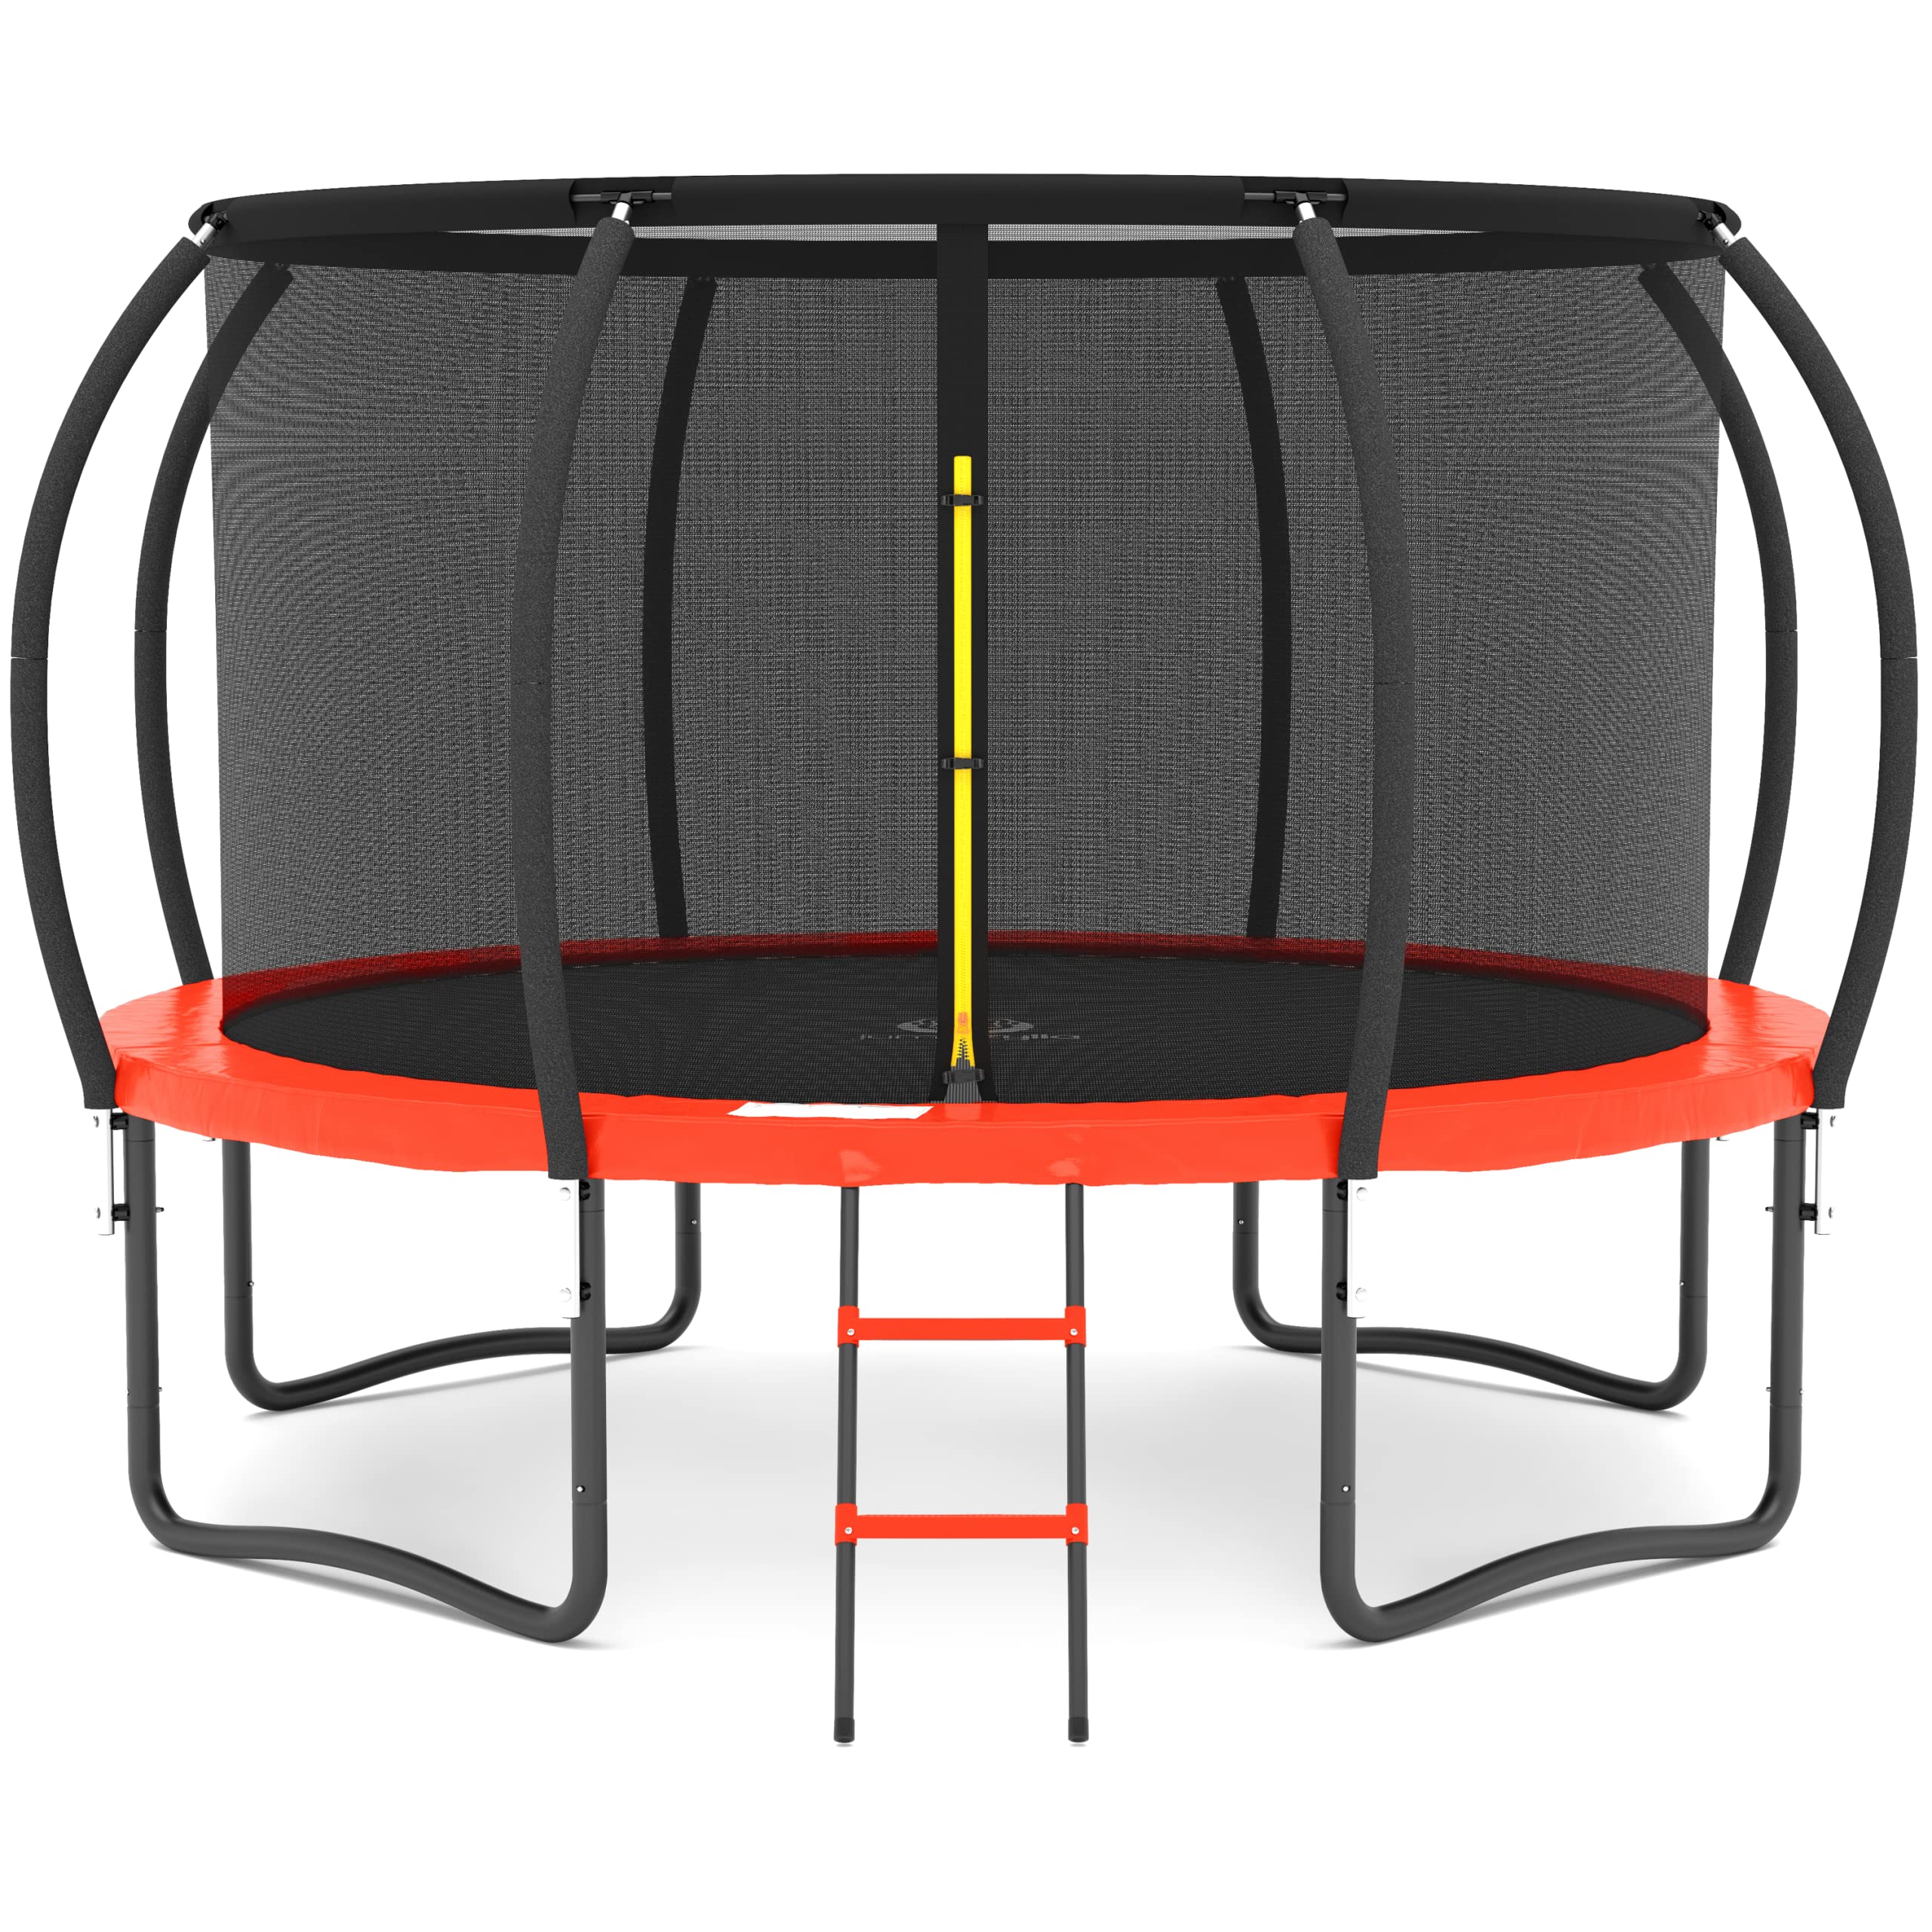 JUMPZYLLA Trampoline 8FT 10FT 12FT 14FT Trampoline with Enclosure - Recreational Trampolines with Ladder and galvanized Anti-Rus